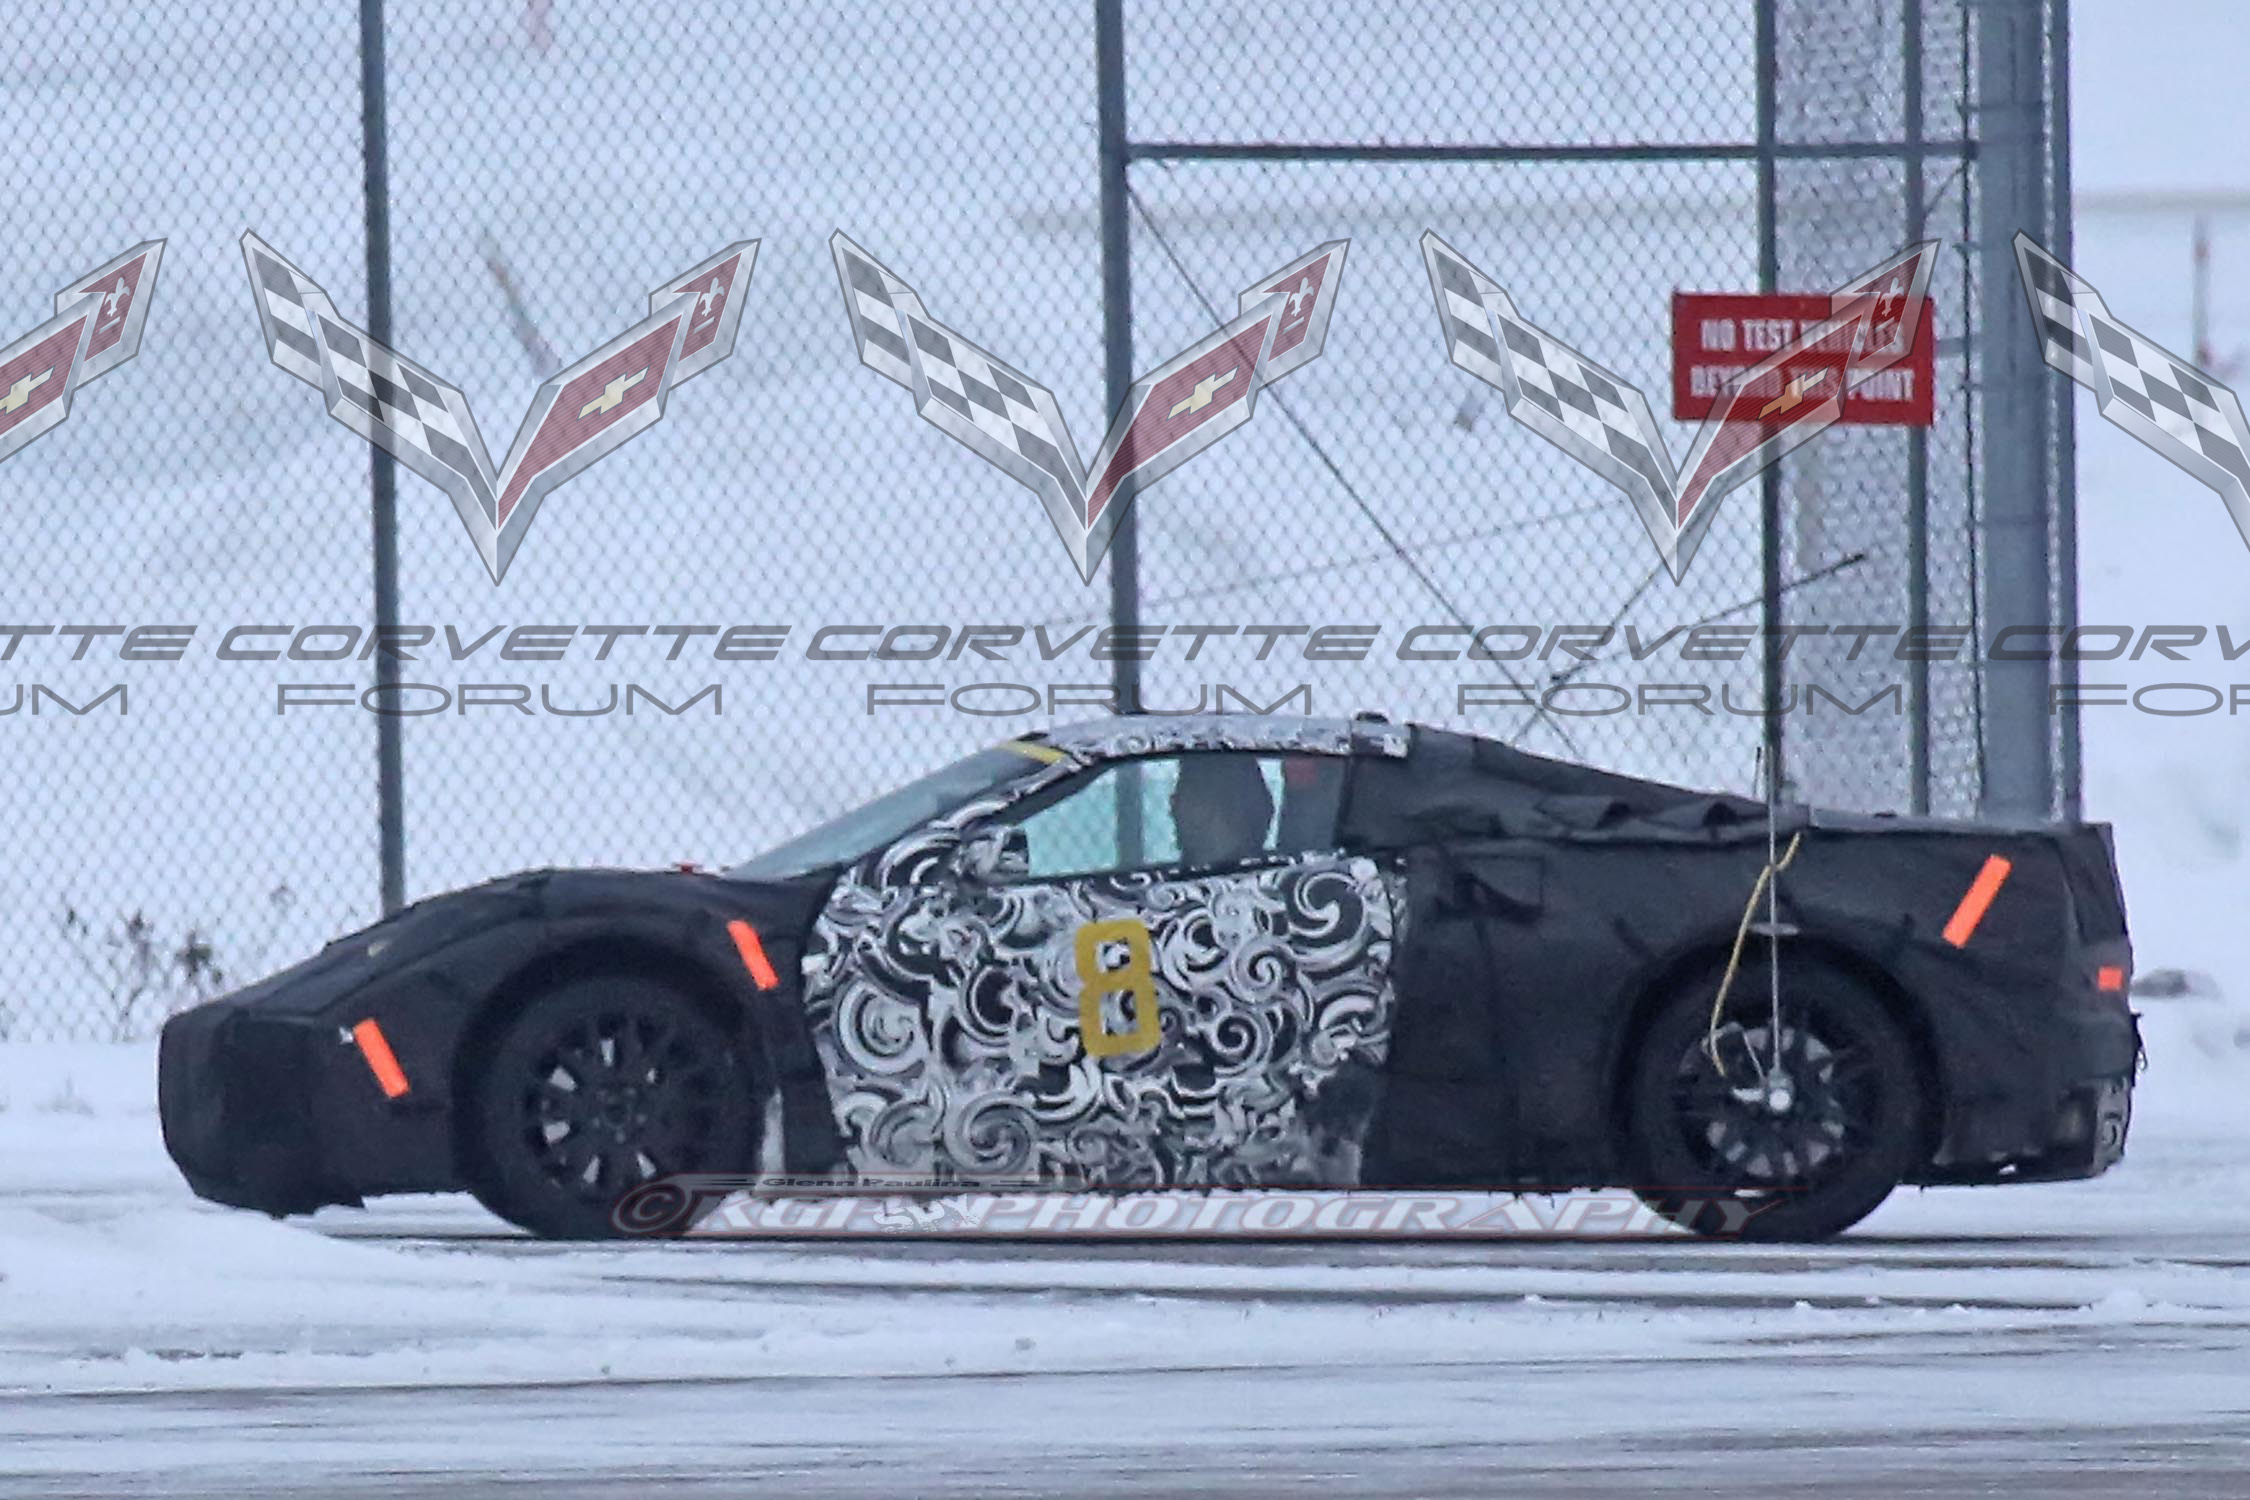 Chevy Dealership Leaks First Look at Mid-Engine Corvette Body Work